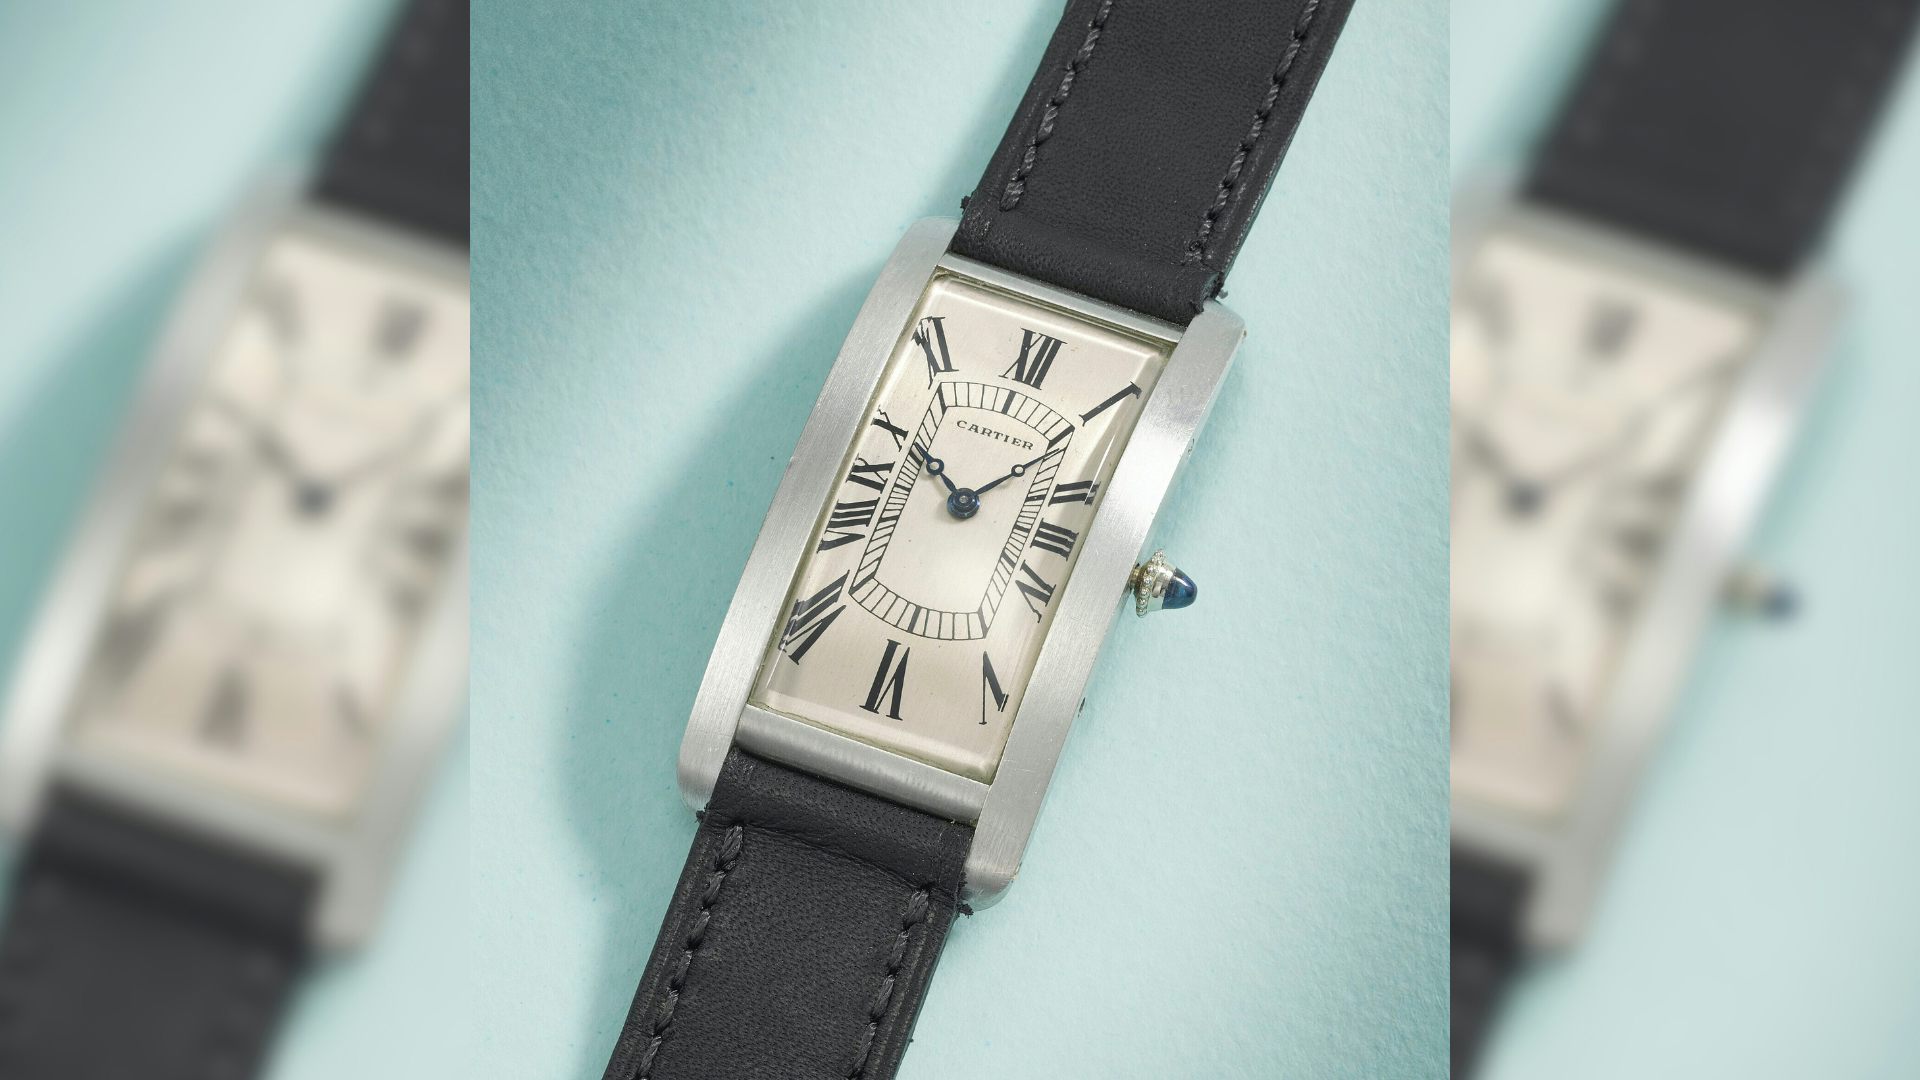 Is Cartier Leading the Return of Small Watches for Men?